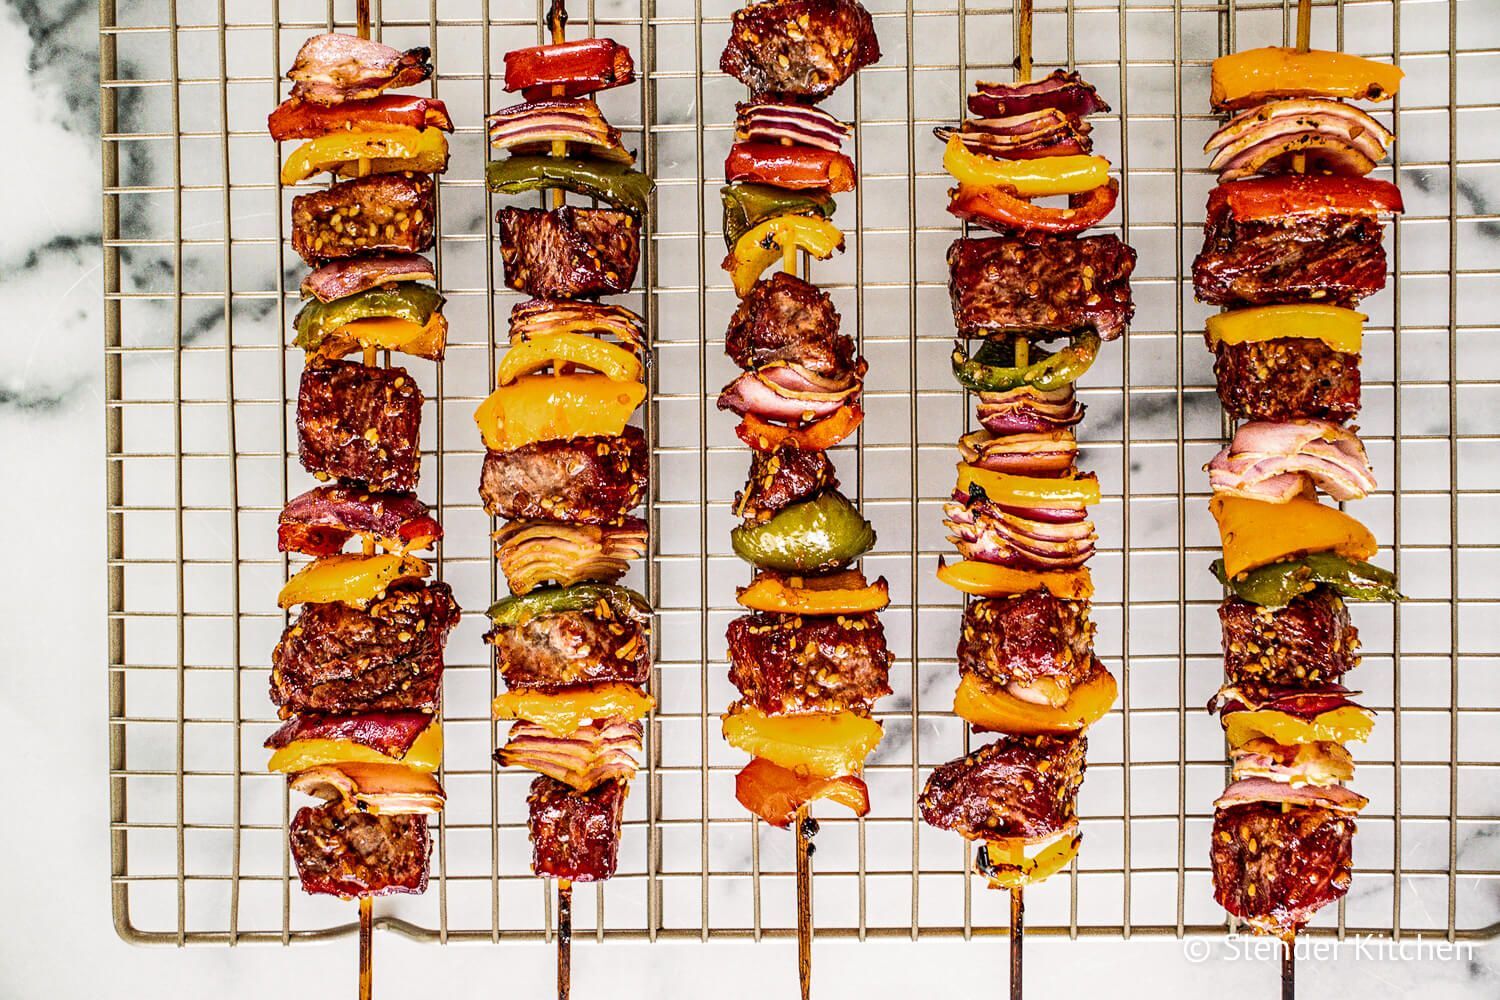 Teriyaki beef kabobs with red onions, bell peppers, and teriyaki sauce on skewers on a rack. 